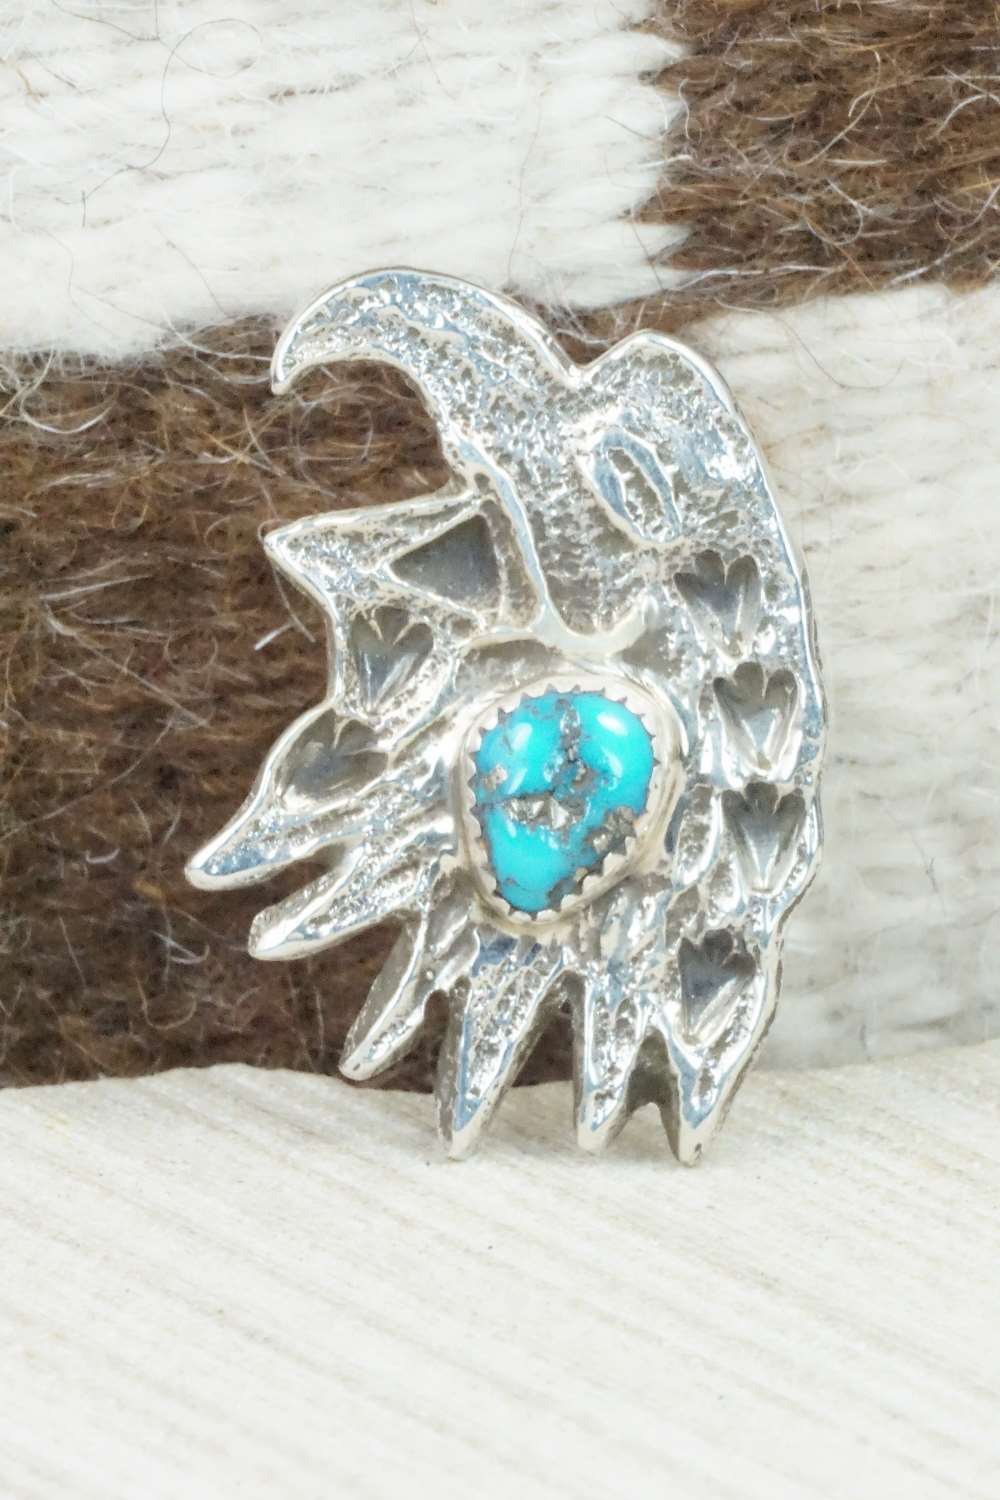 Turquoise & Sterling Silver Ring - Delbert Arviso - 9